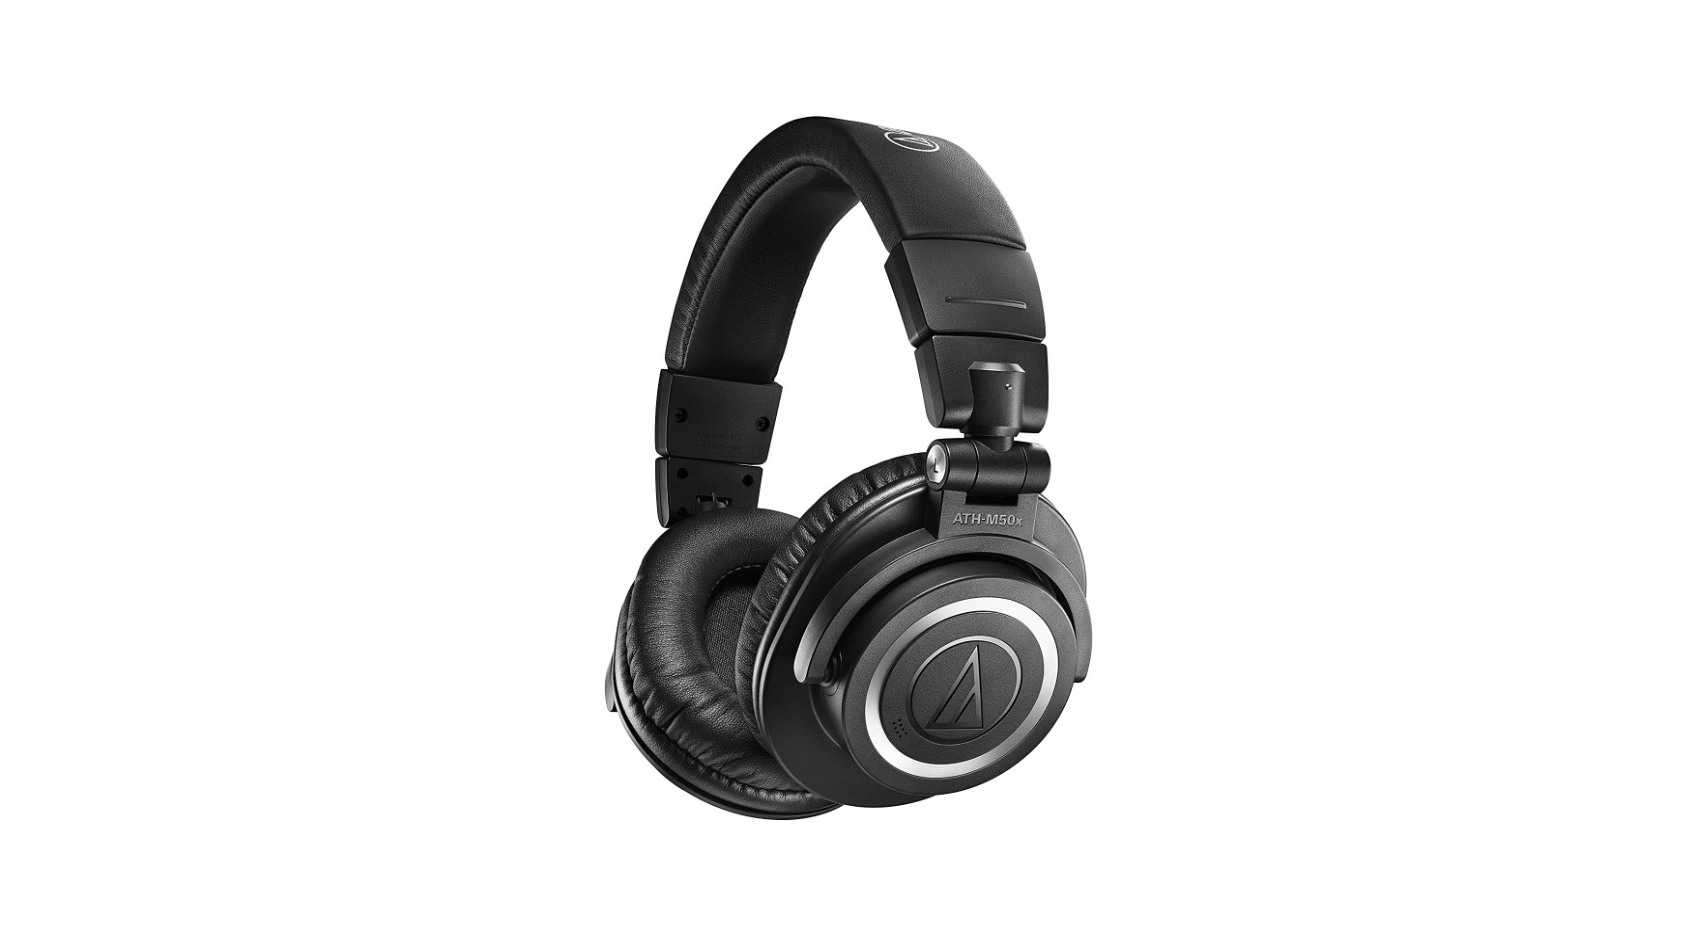 Product shot of Audio-Technica ATH-M50xBT2